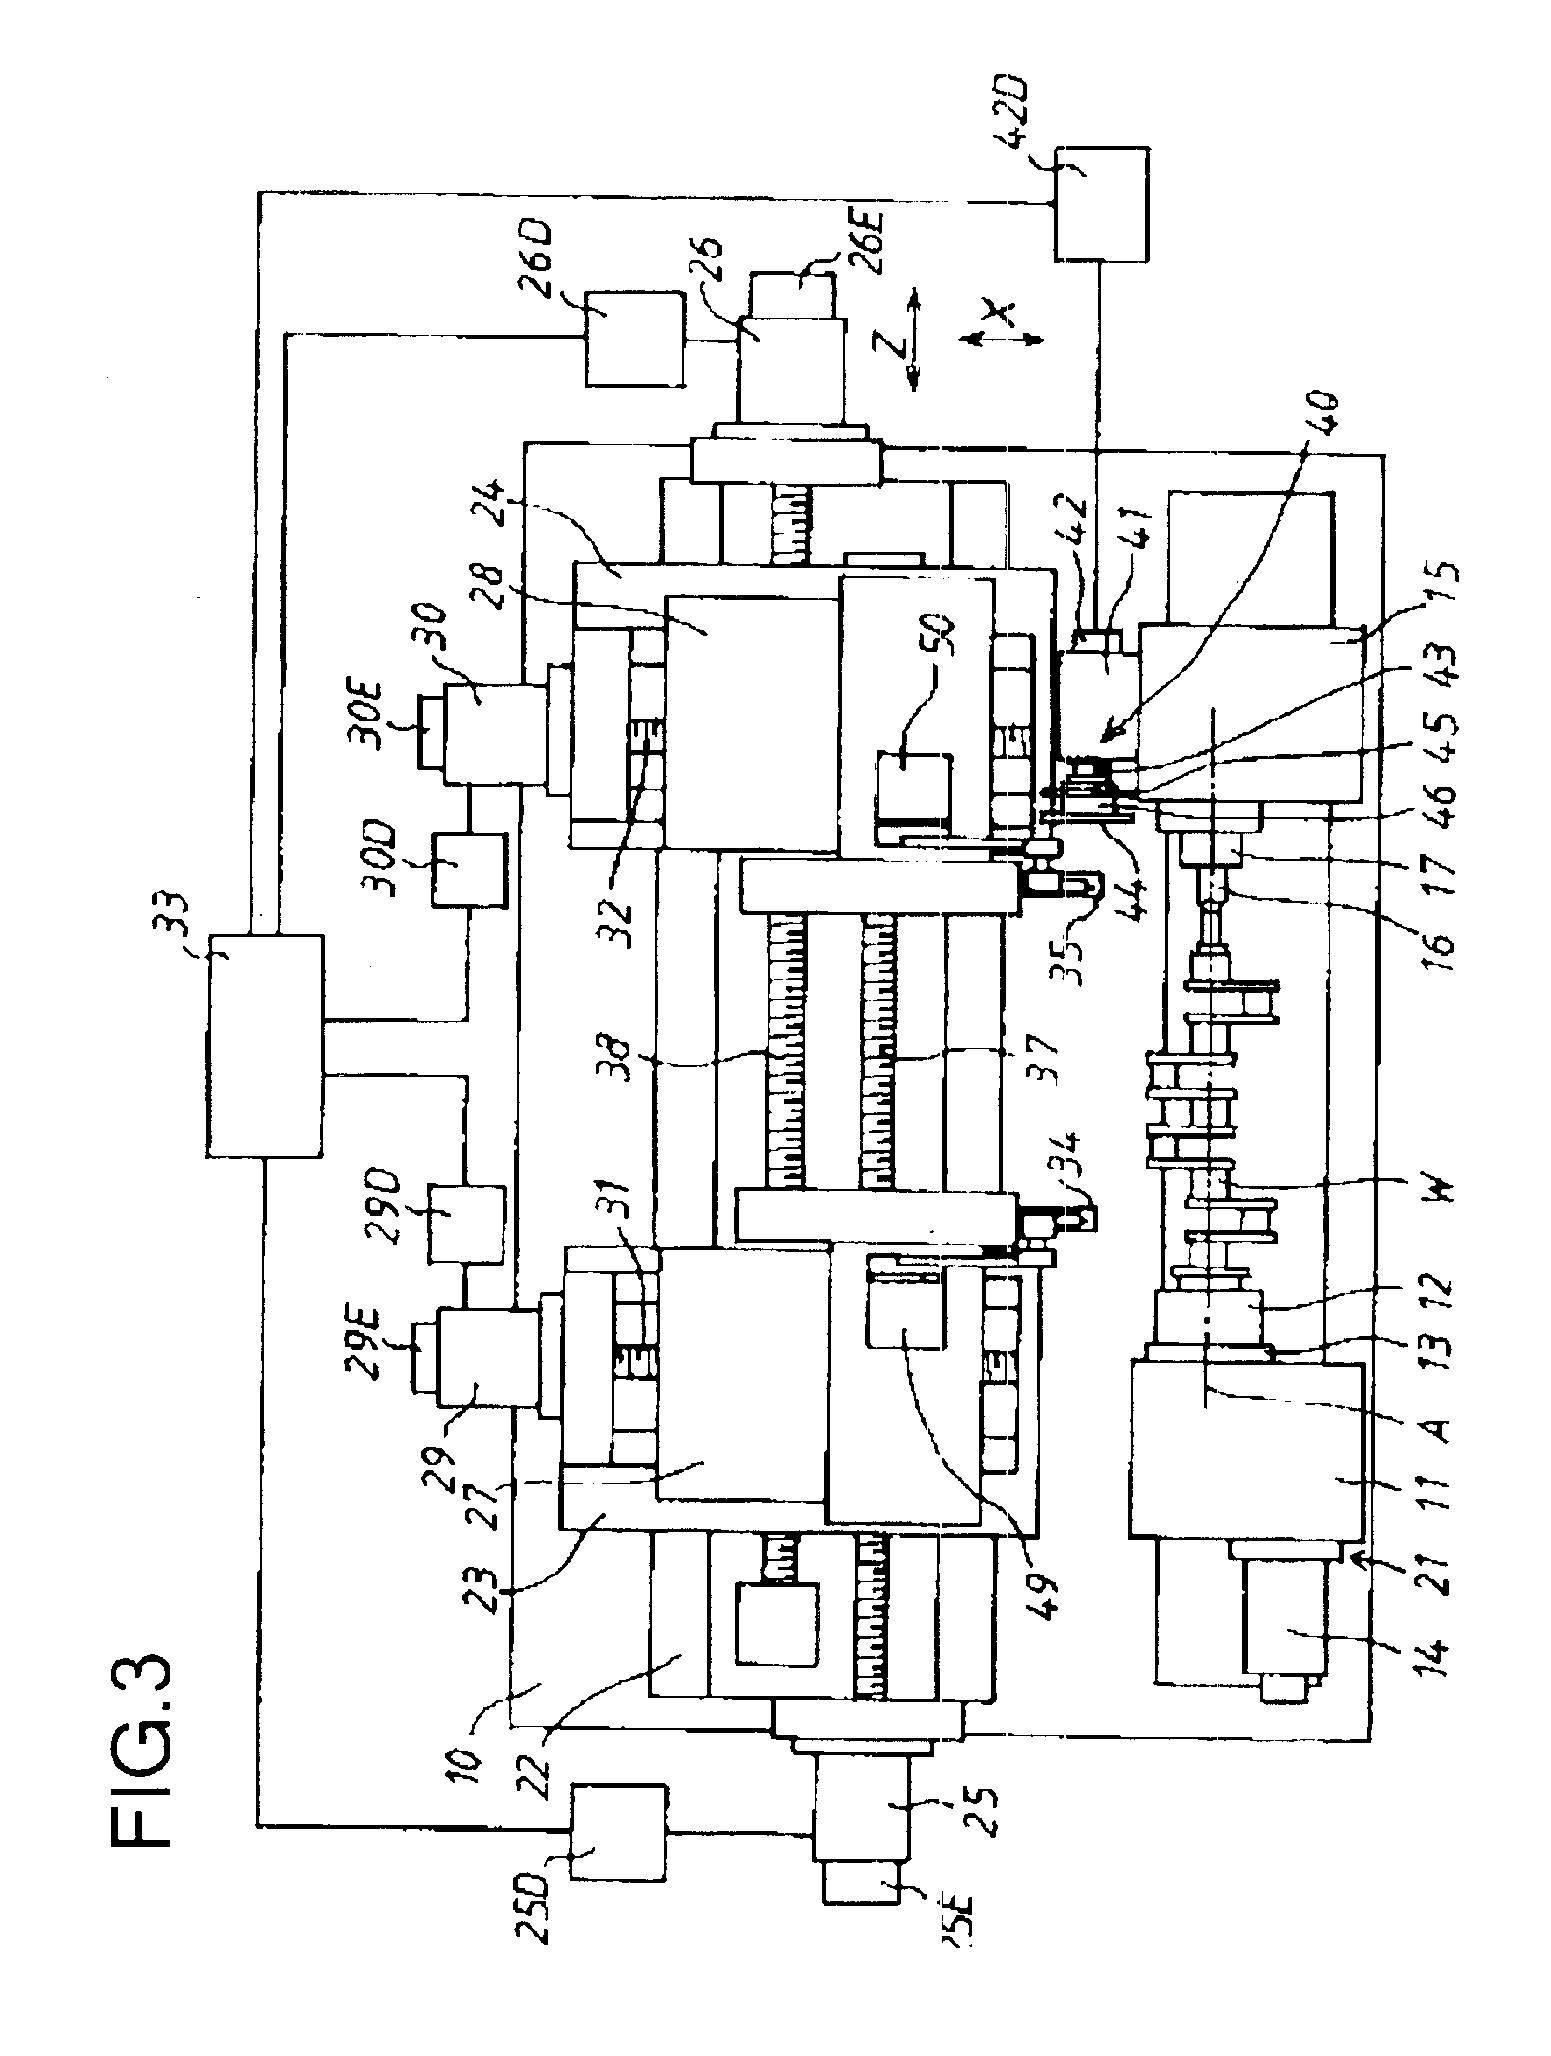 Method and apparatus for grinding workpiece surfaces to super-finish surface with micro oil pockets